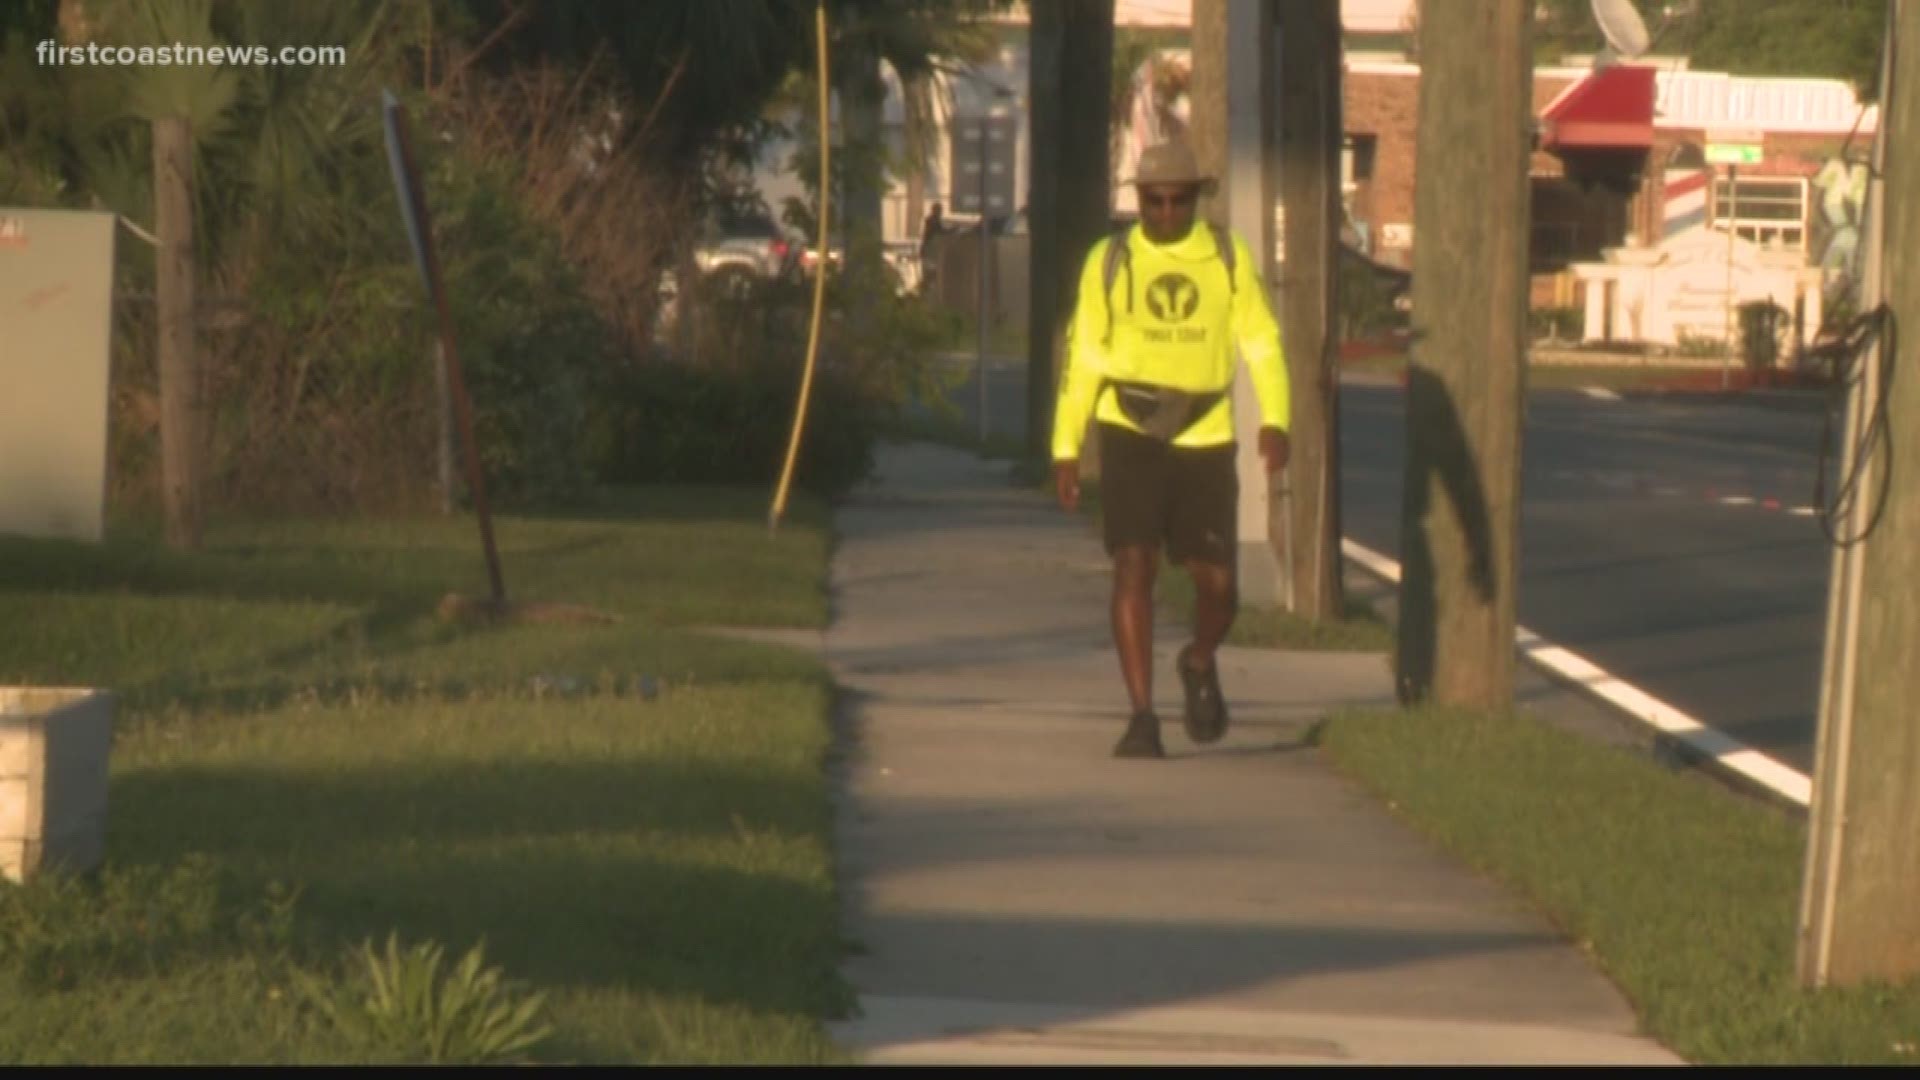 Roger Dehart with the Broward County Sheriff's Office started a walking campaign and made it to the First Coast on Monday.